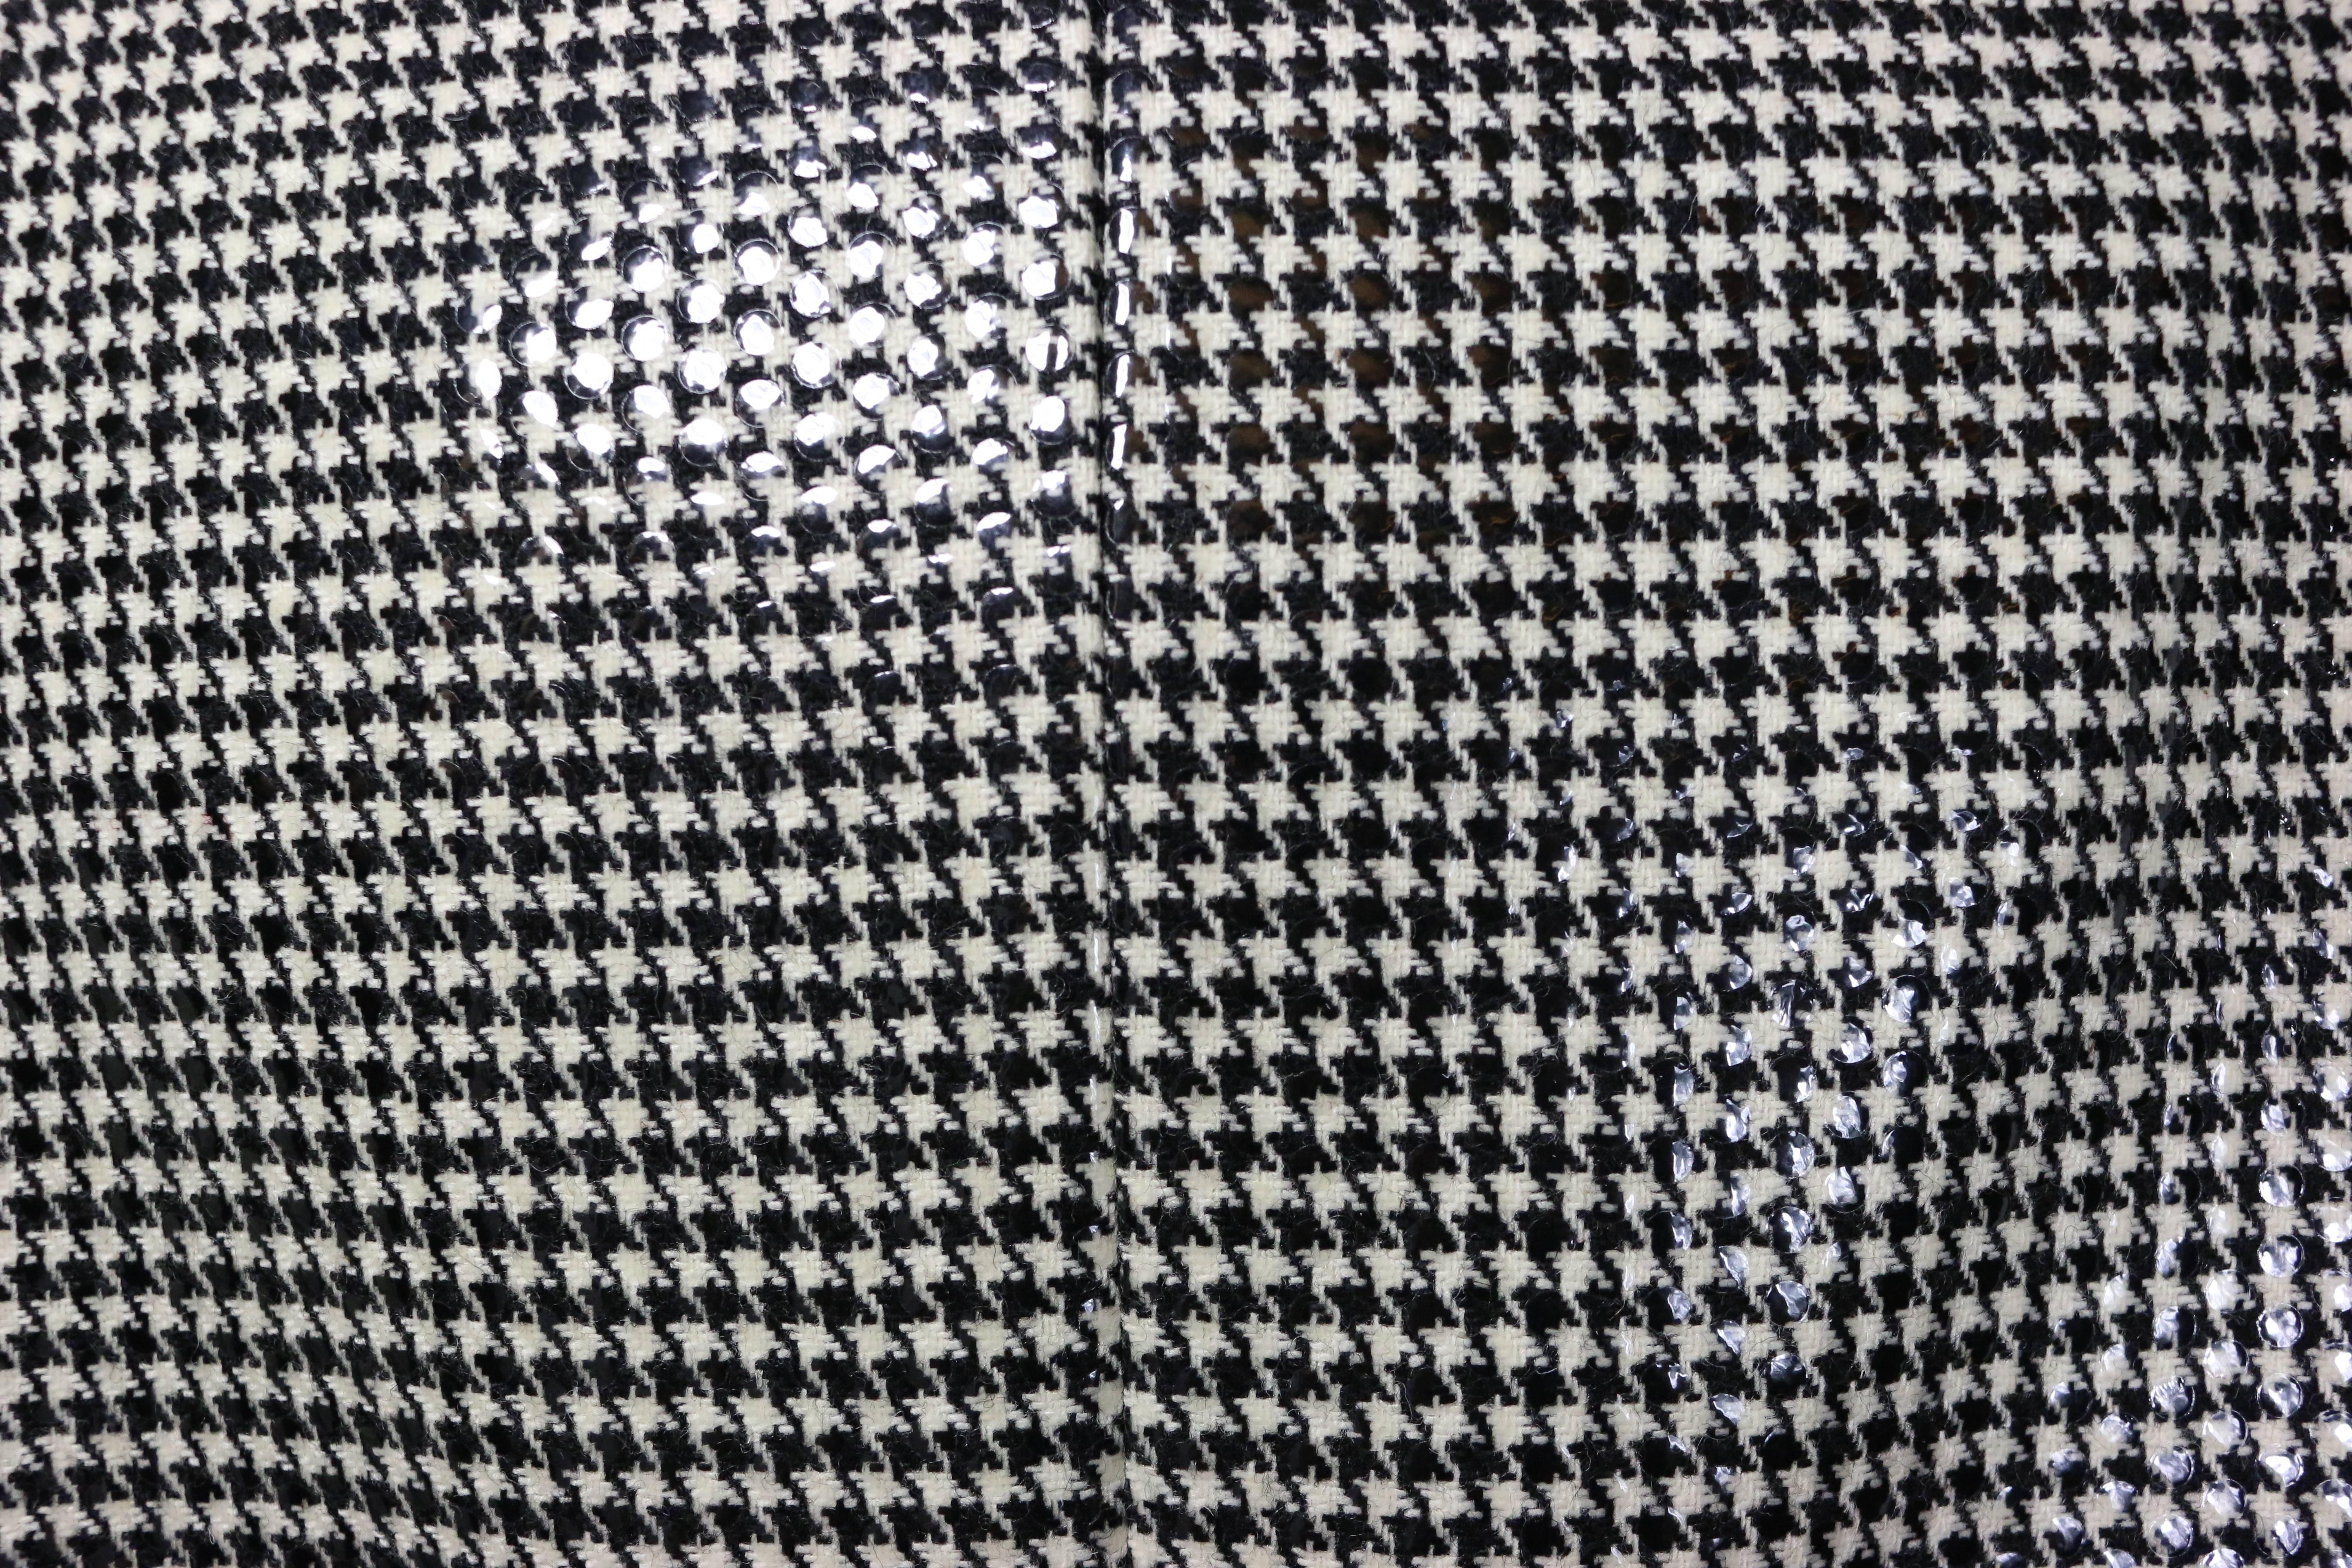 kenneth cole houndstooth wool blend knit coat